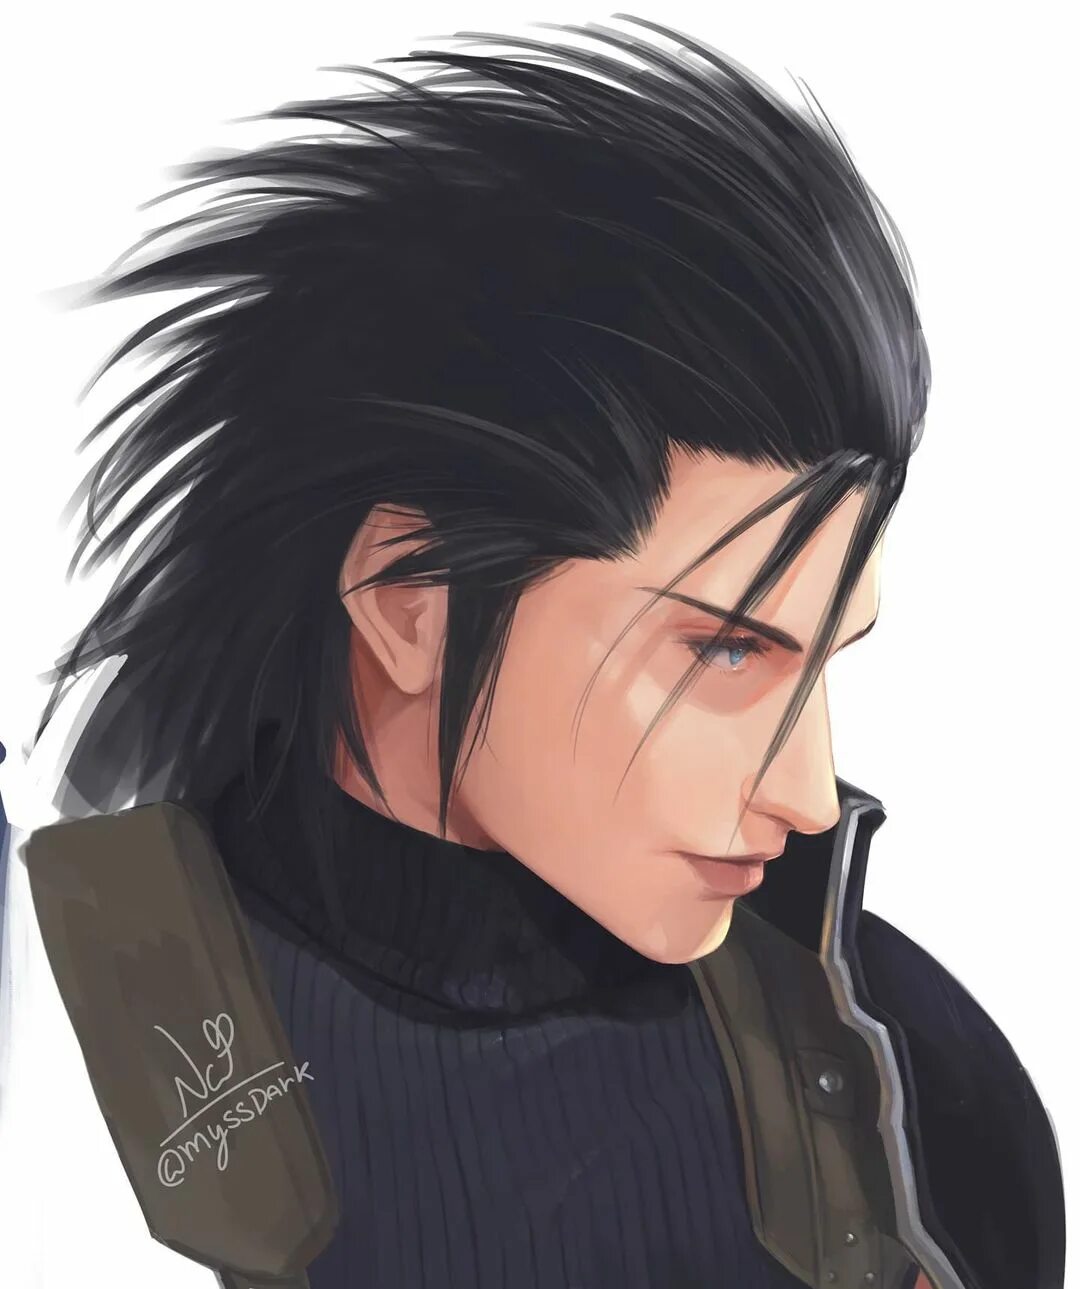 with zack fair!used some screenshots from the game as ref : )#FF7Remake #ff...